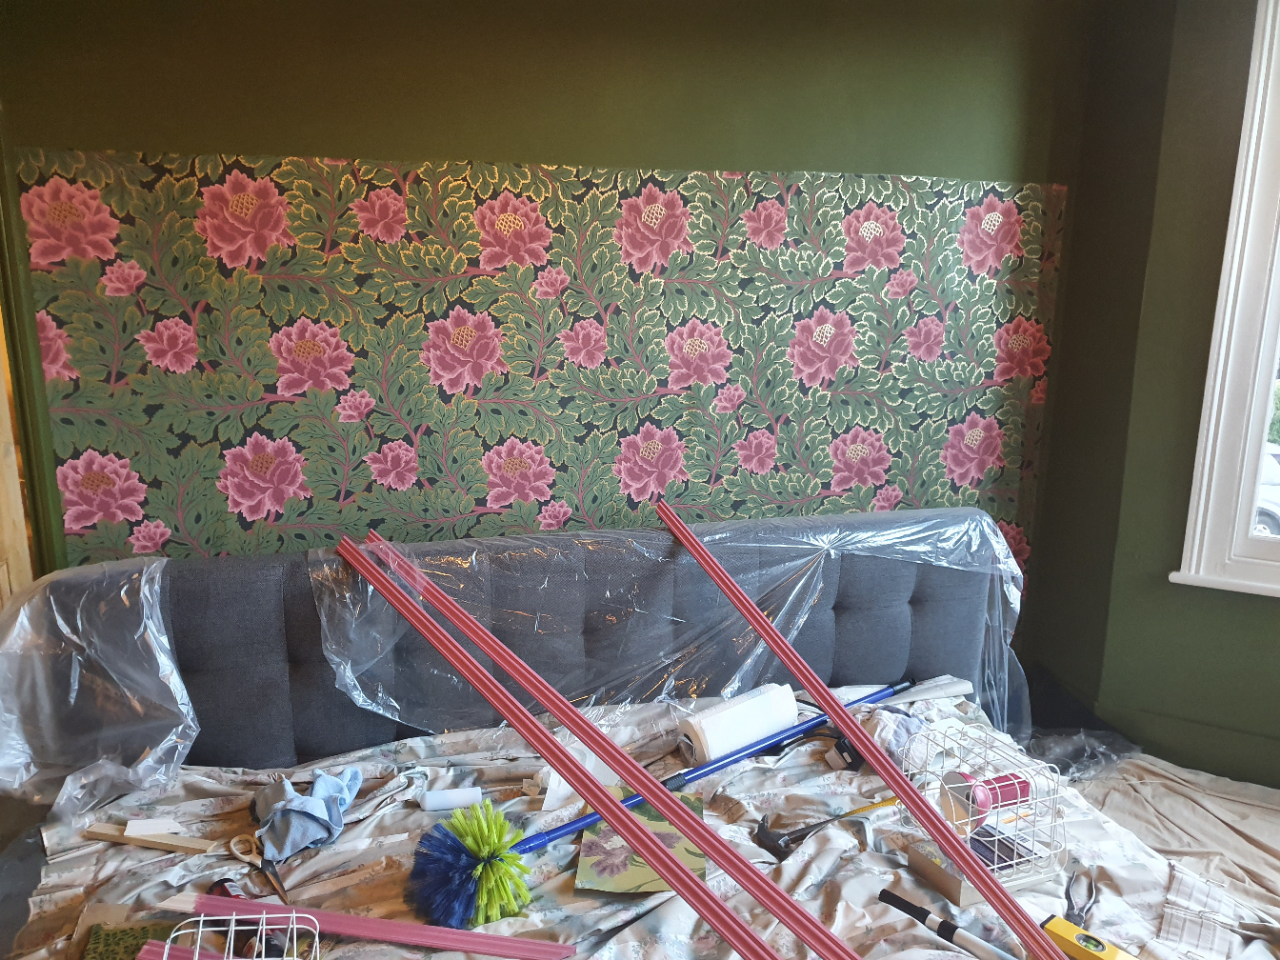 A photo of the wallpaper on the wall, with the pink beading on the bed ready to go up.